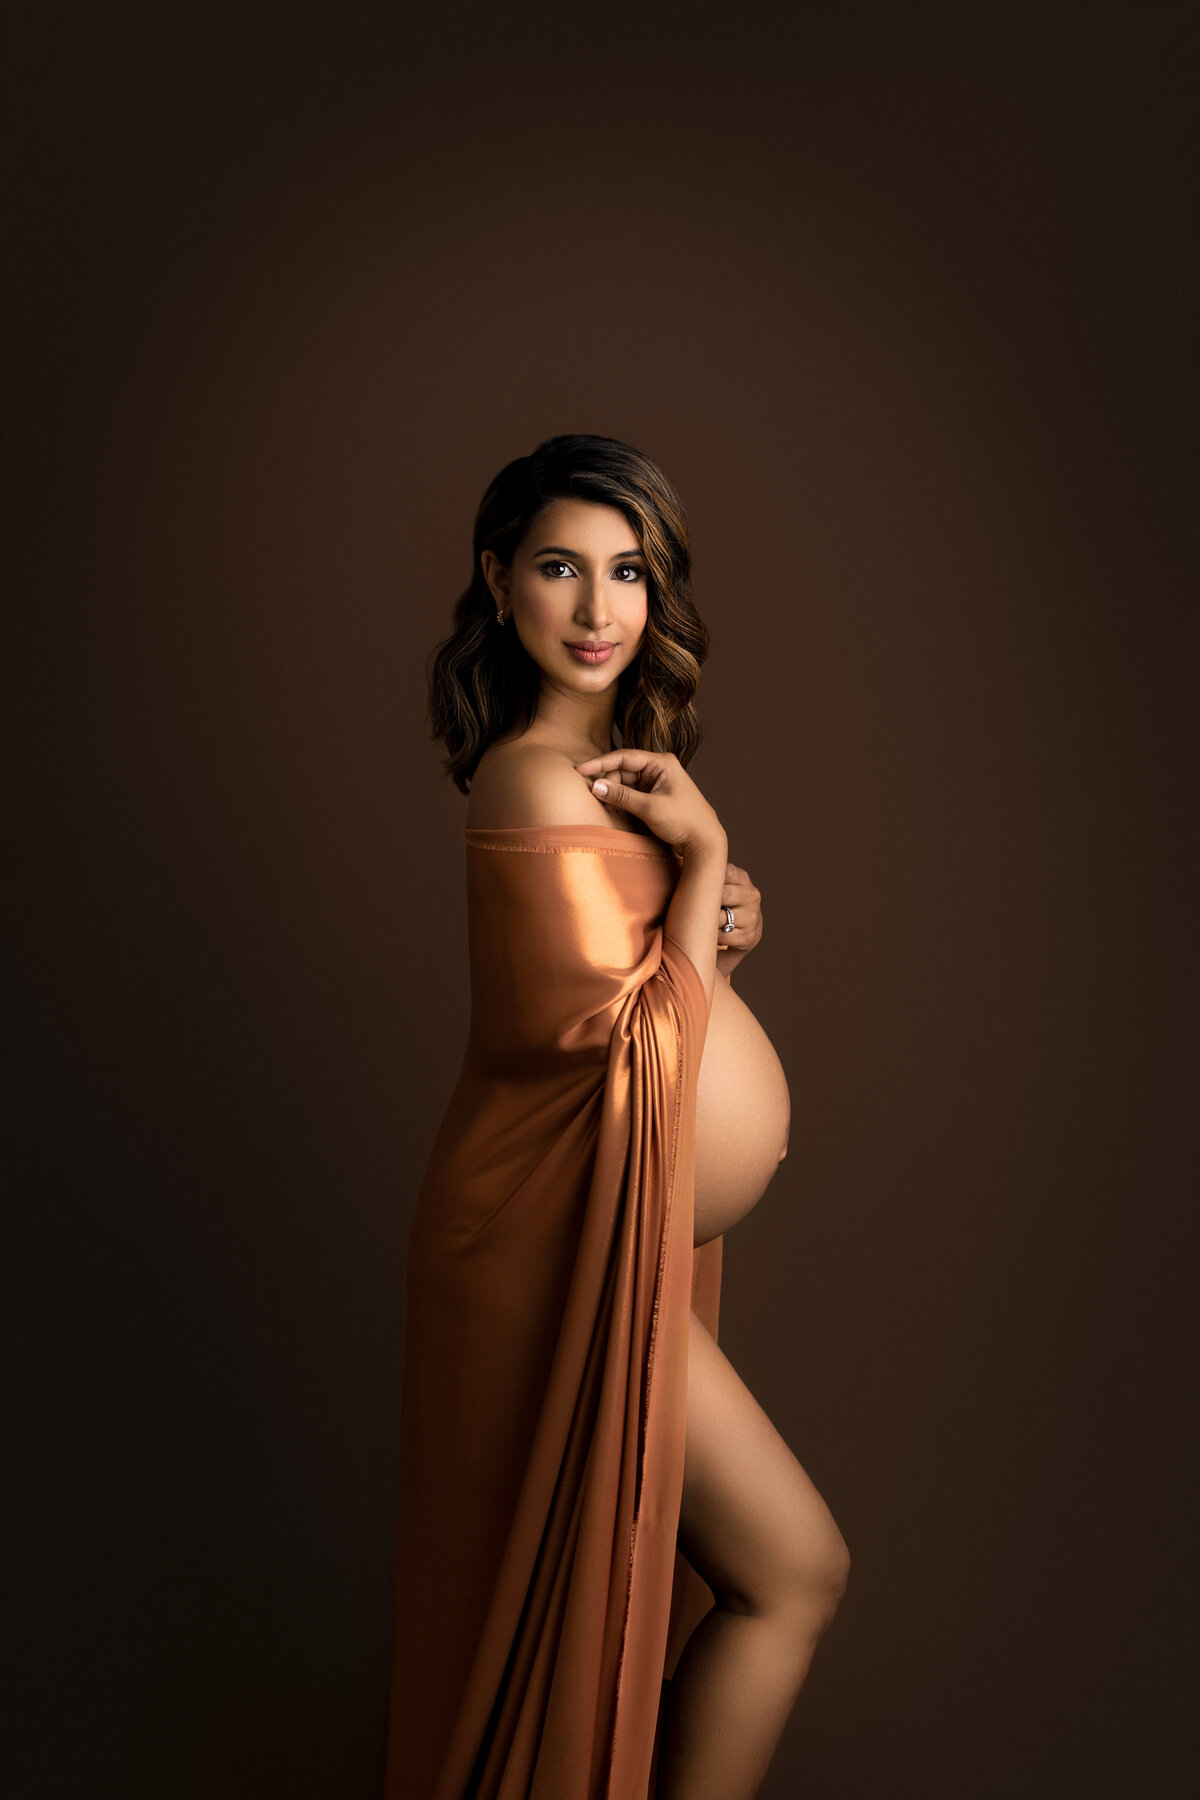 In this fine art photograph, Katie Marshall, the renowned Main Line maternity photographer, artistically captures the allure of an expectant mom. The radiant mother stands gracefully in a stunning copper-colored silk gown, her profile accentuated by the gentle drape of the fabric. Her flowing reddish-brown curls cascade elegantly over her shoulder, framing her serene expression as she gazes back over her shoulder towards the camera, her smile exuding warmth and anticipation.